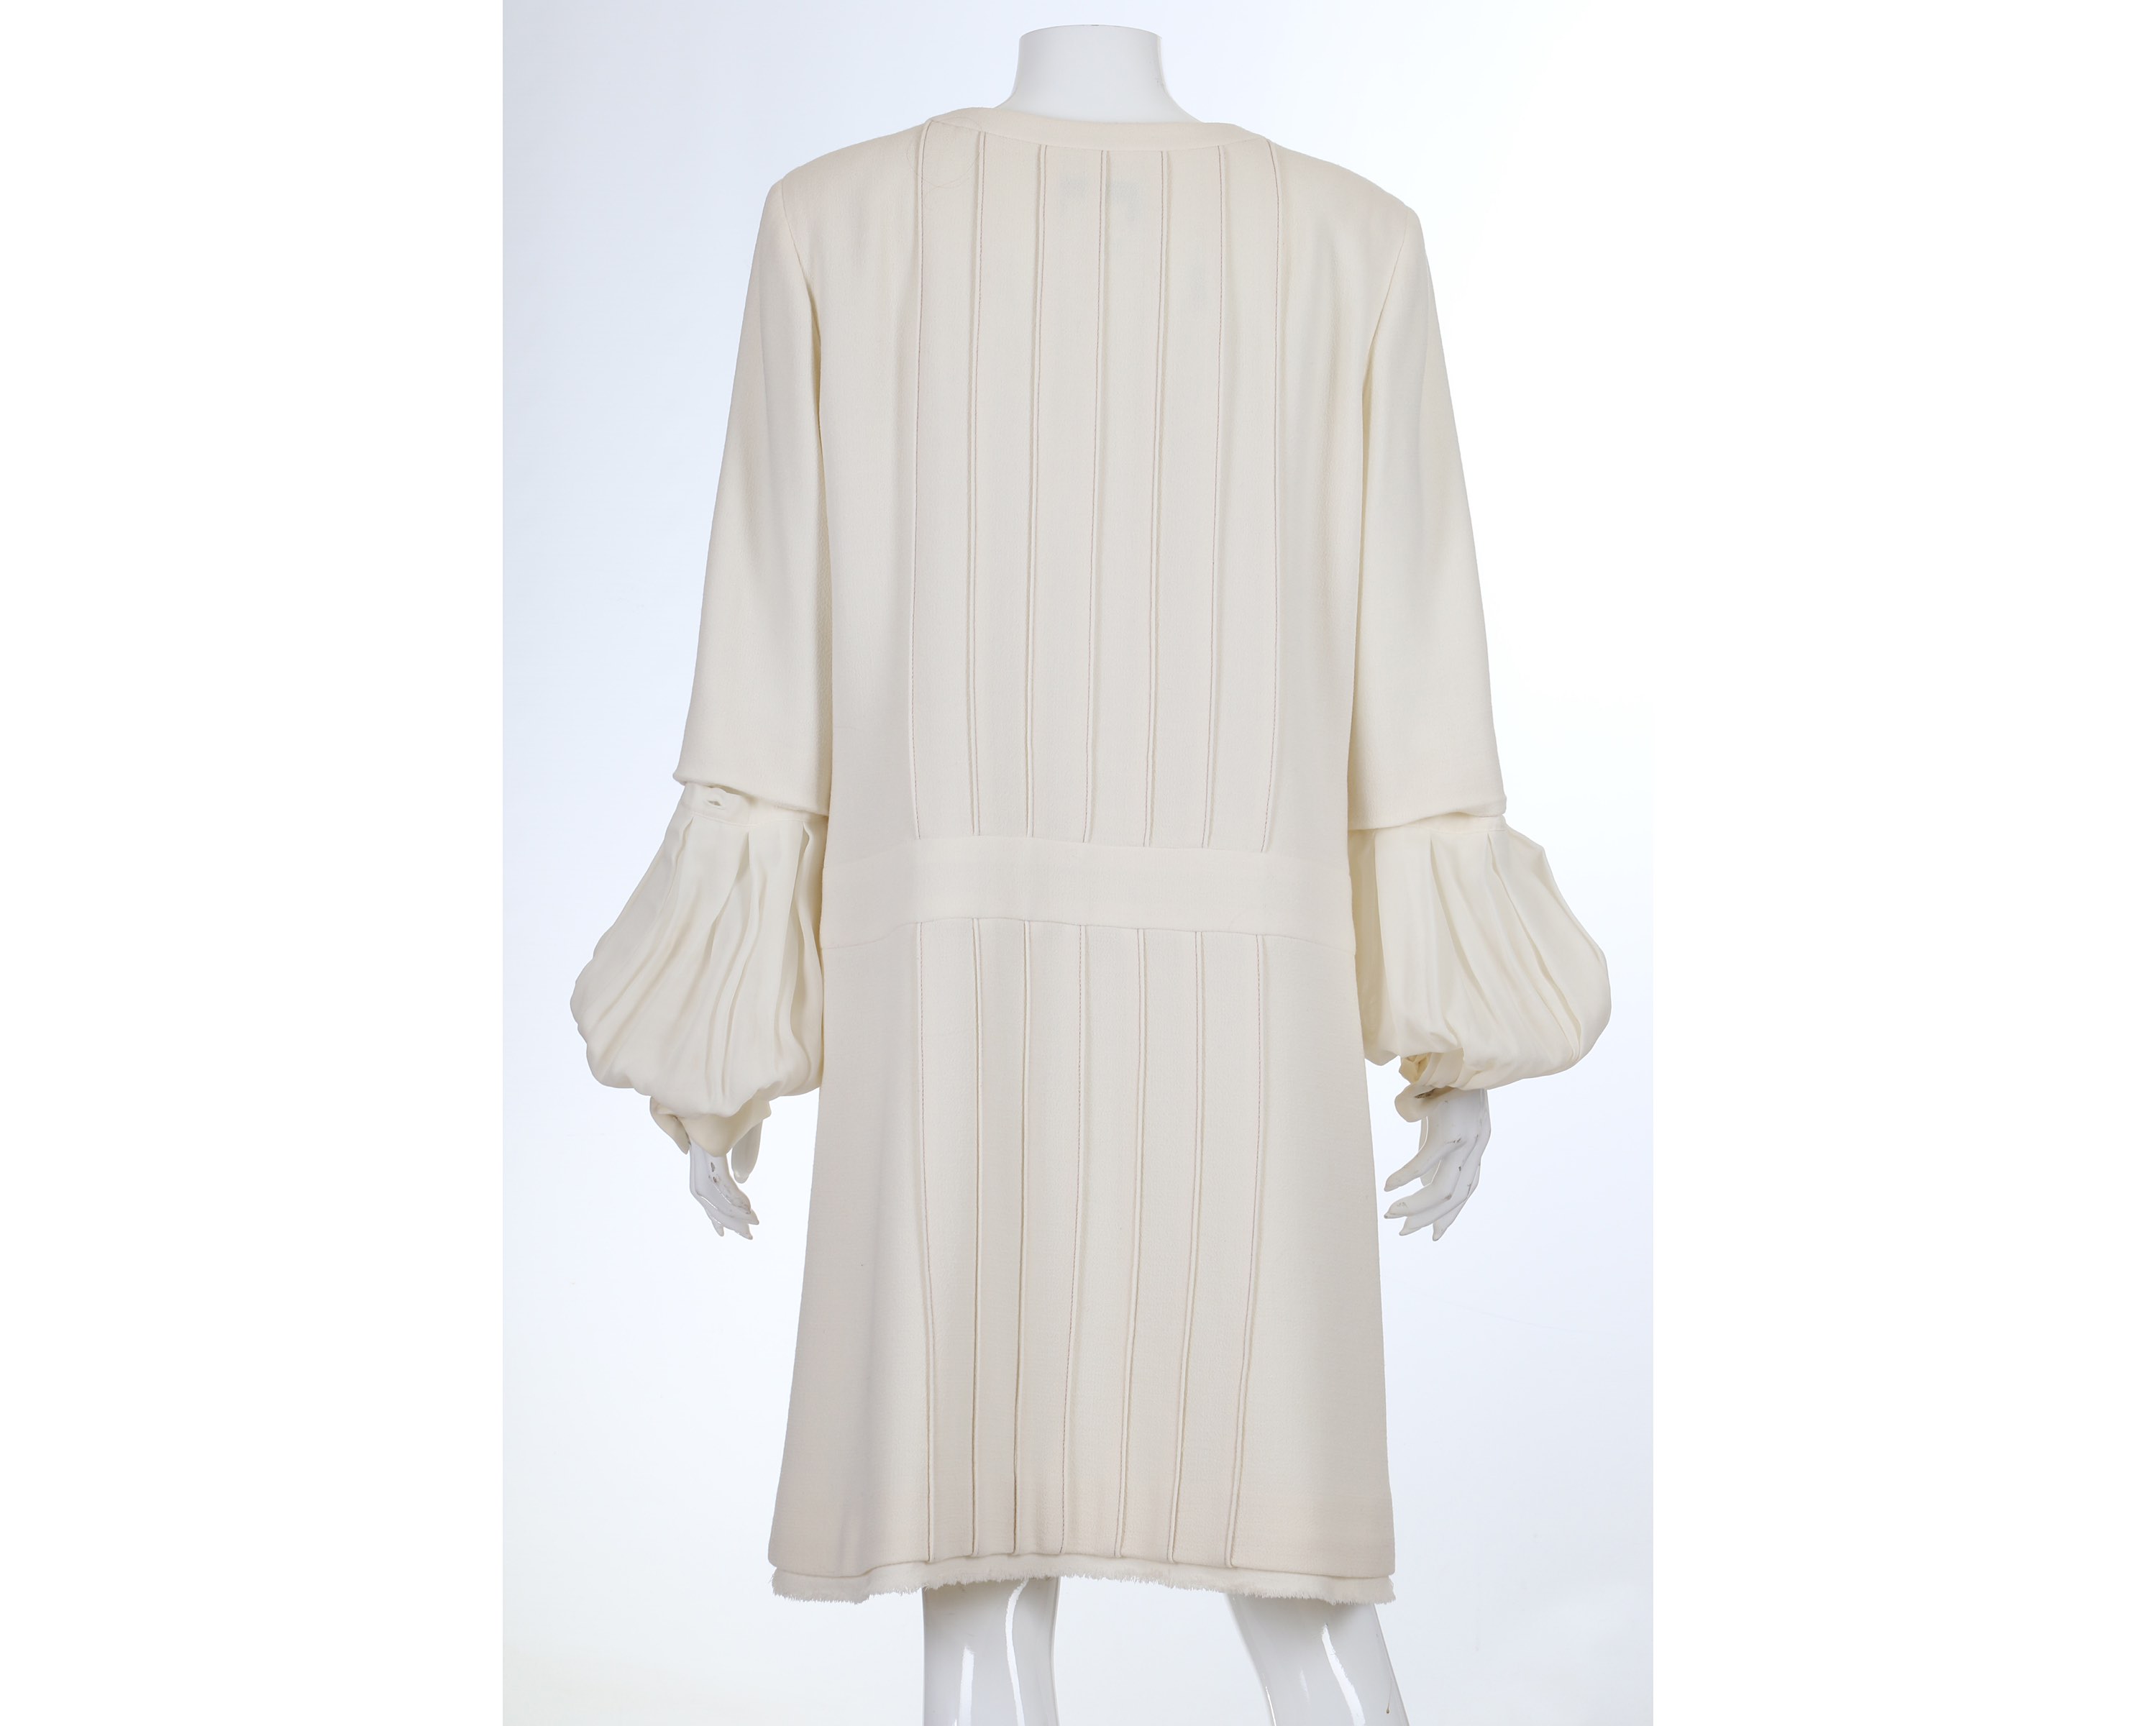 Chanel Cream Pleated Dress Coat, 2010s, with zip down front and removable silk sleeve details, - Image 4 of 5